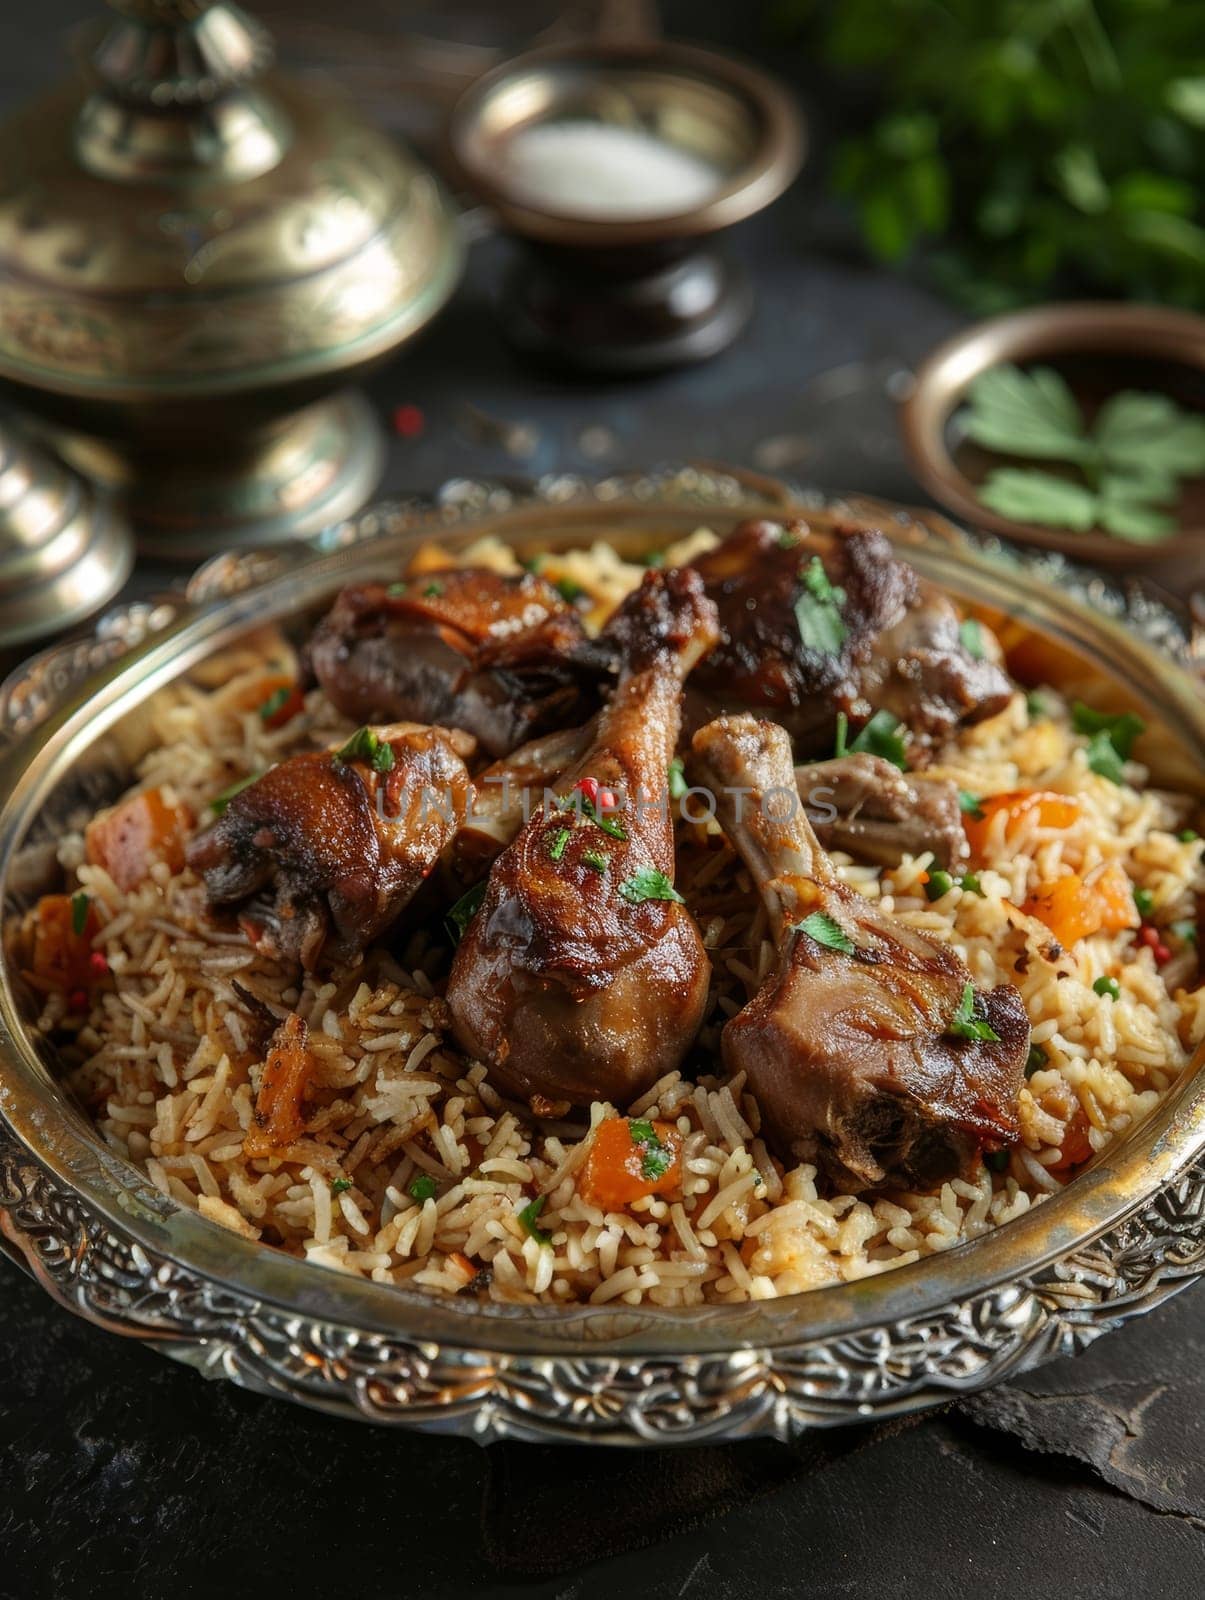 Kuwaiti machboos, spiced rice with chicken or lamb, served on a decorative plate. A traditional and flavorful dish from Kuwait